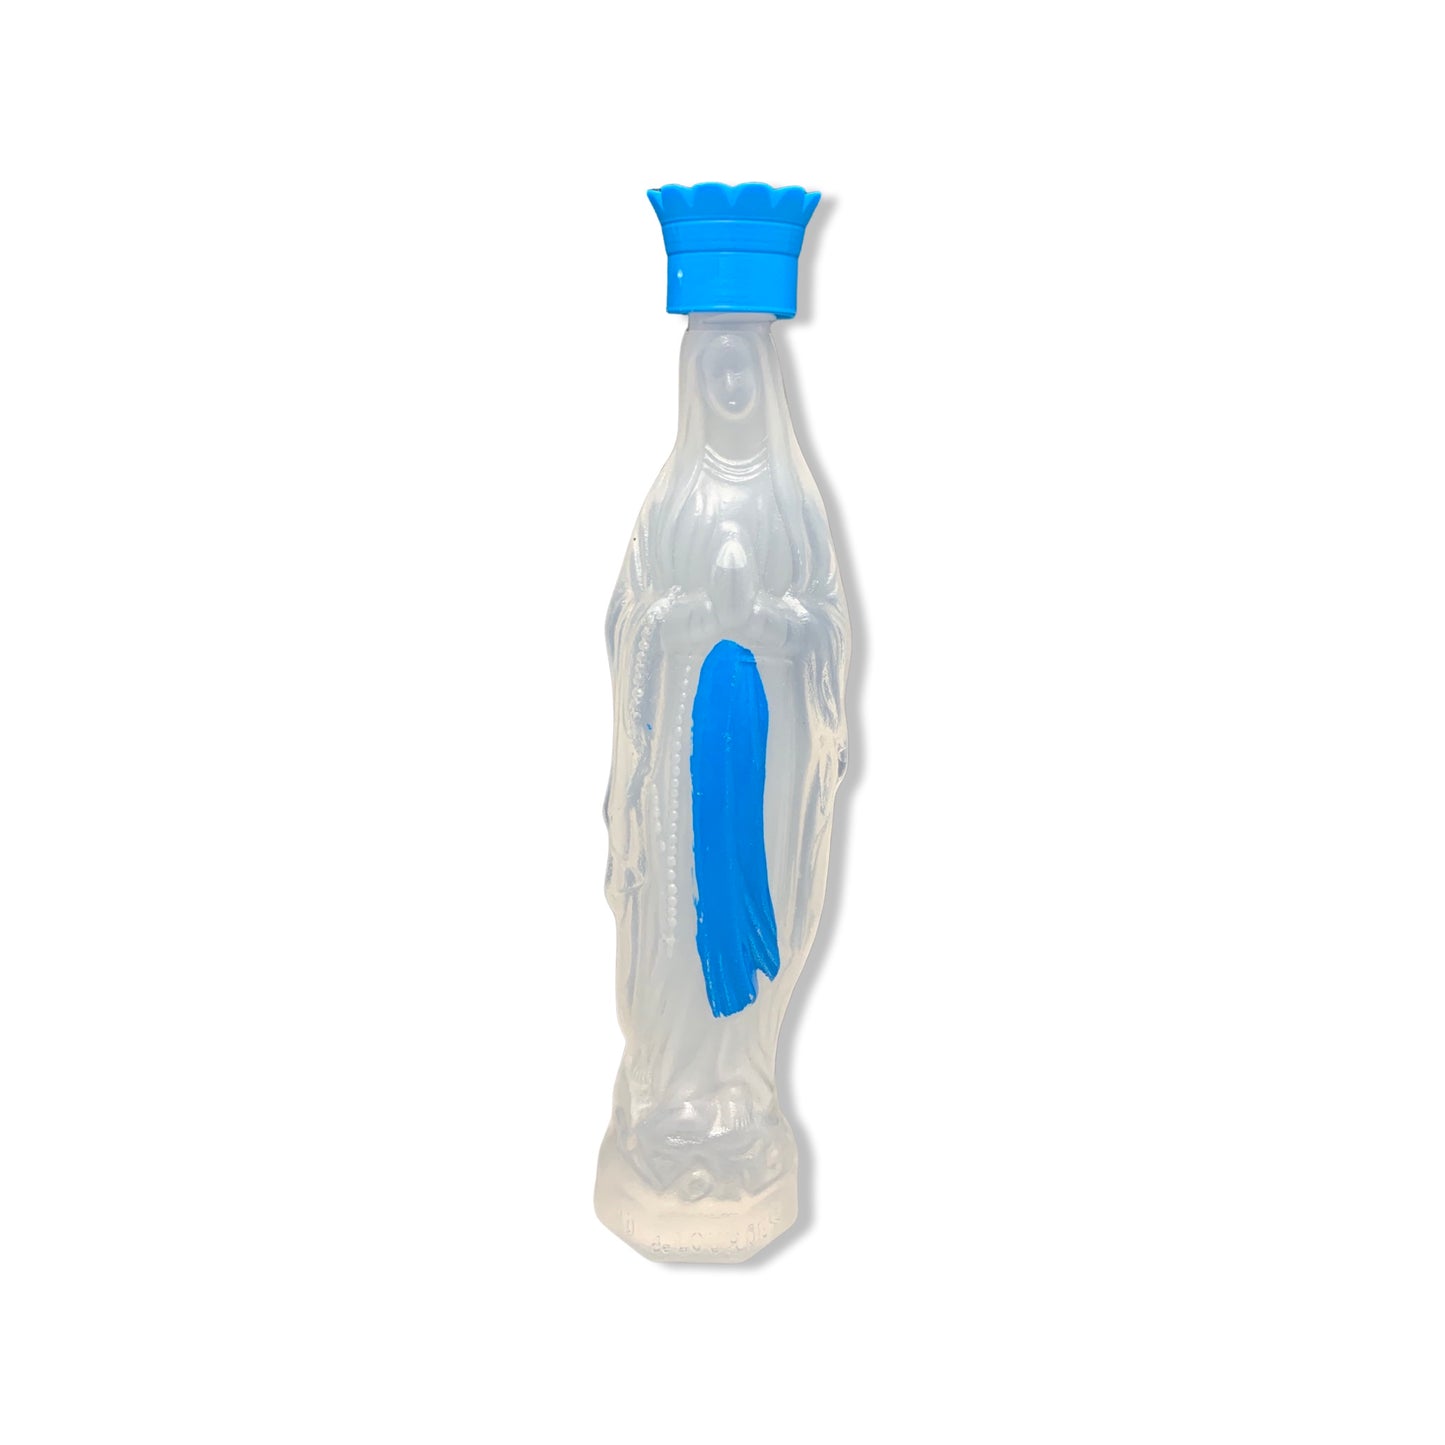 Our Lady of Lourdes Water Bottle with Blue Sash